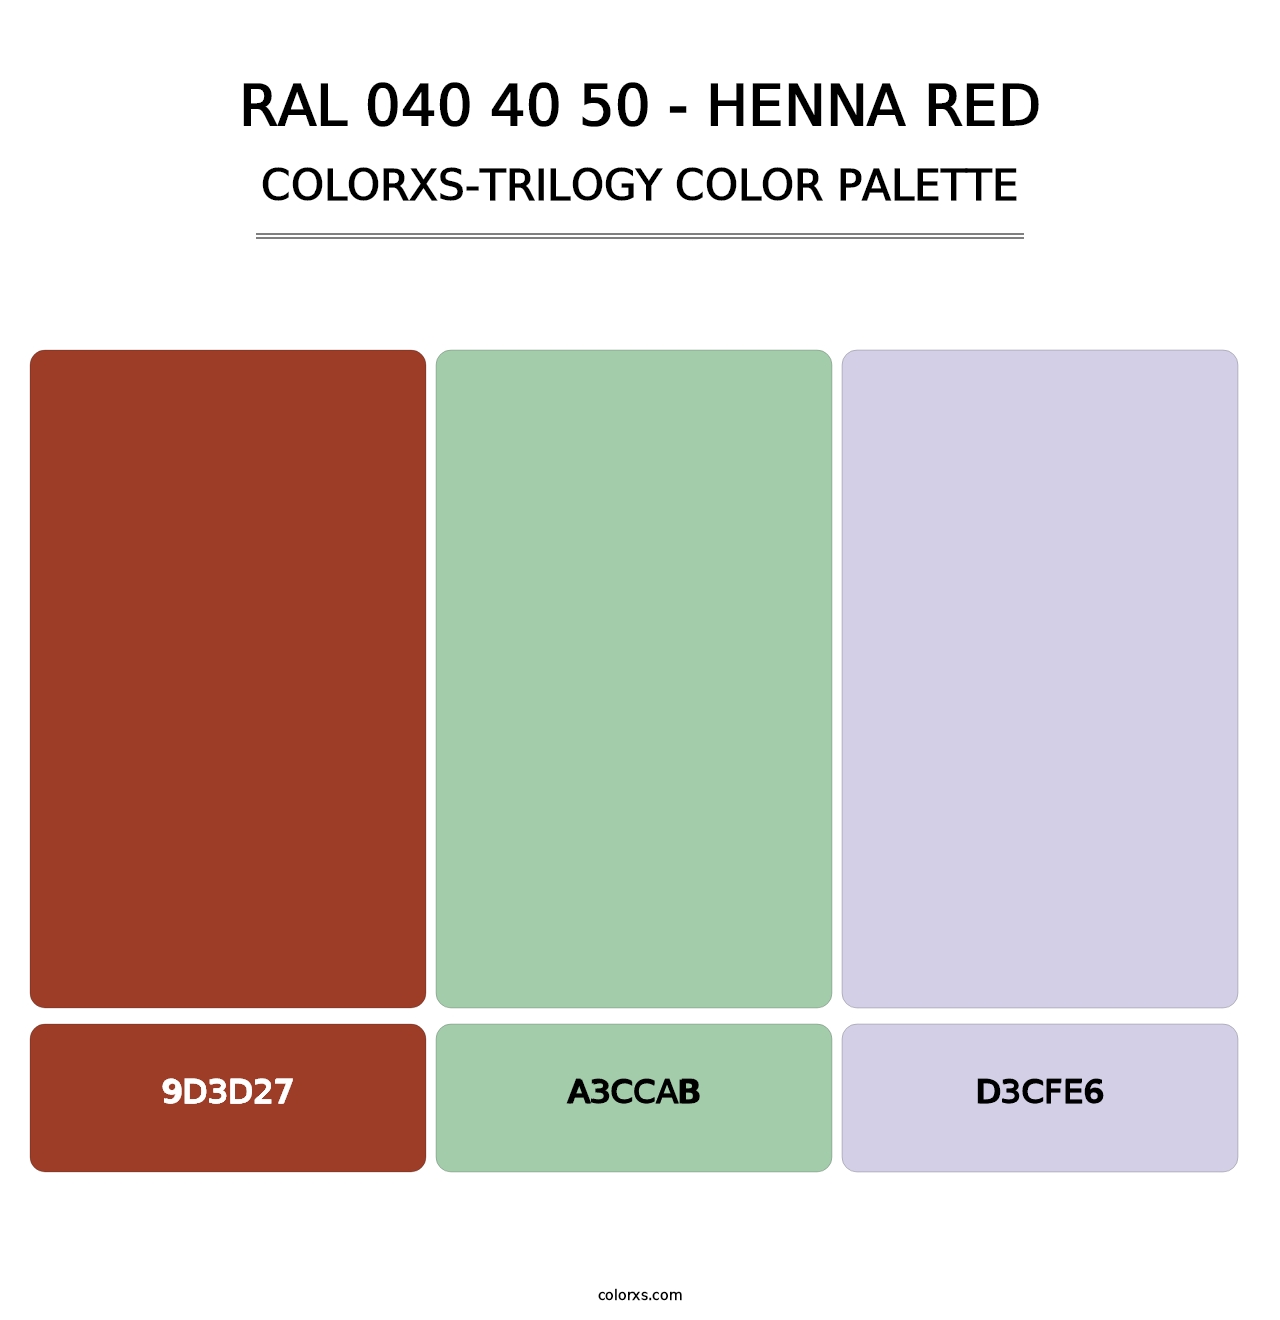 RAL 040 40 50 - Henna Red - Colorxs Trilogy Palette